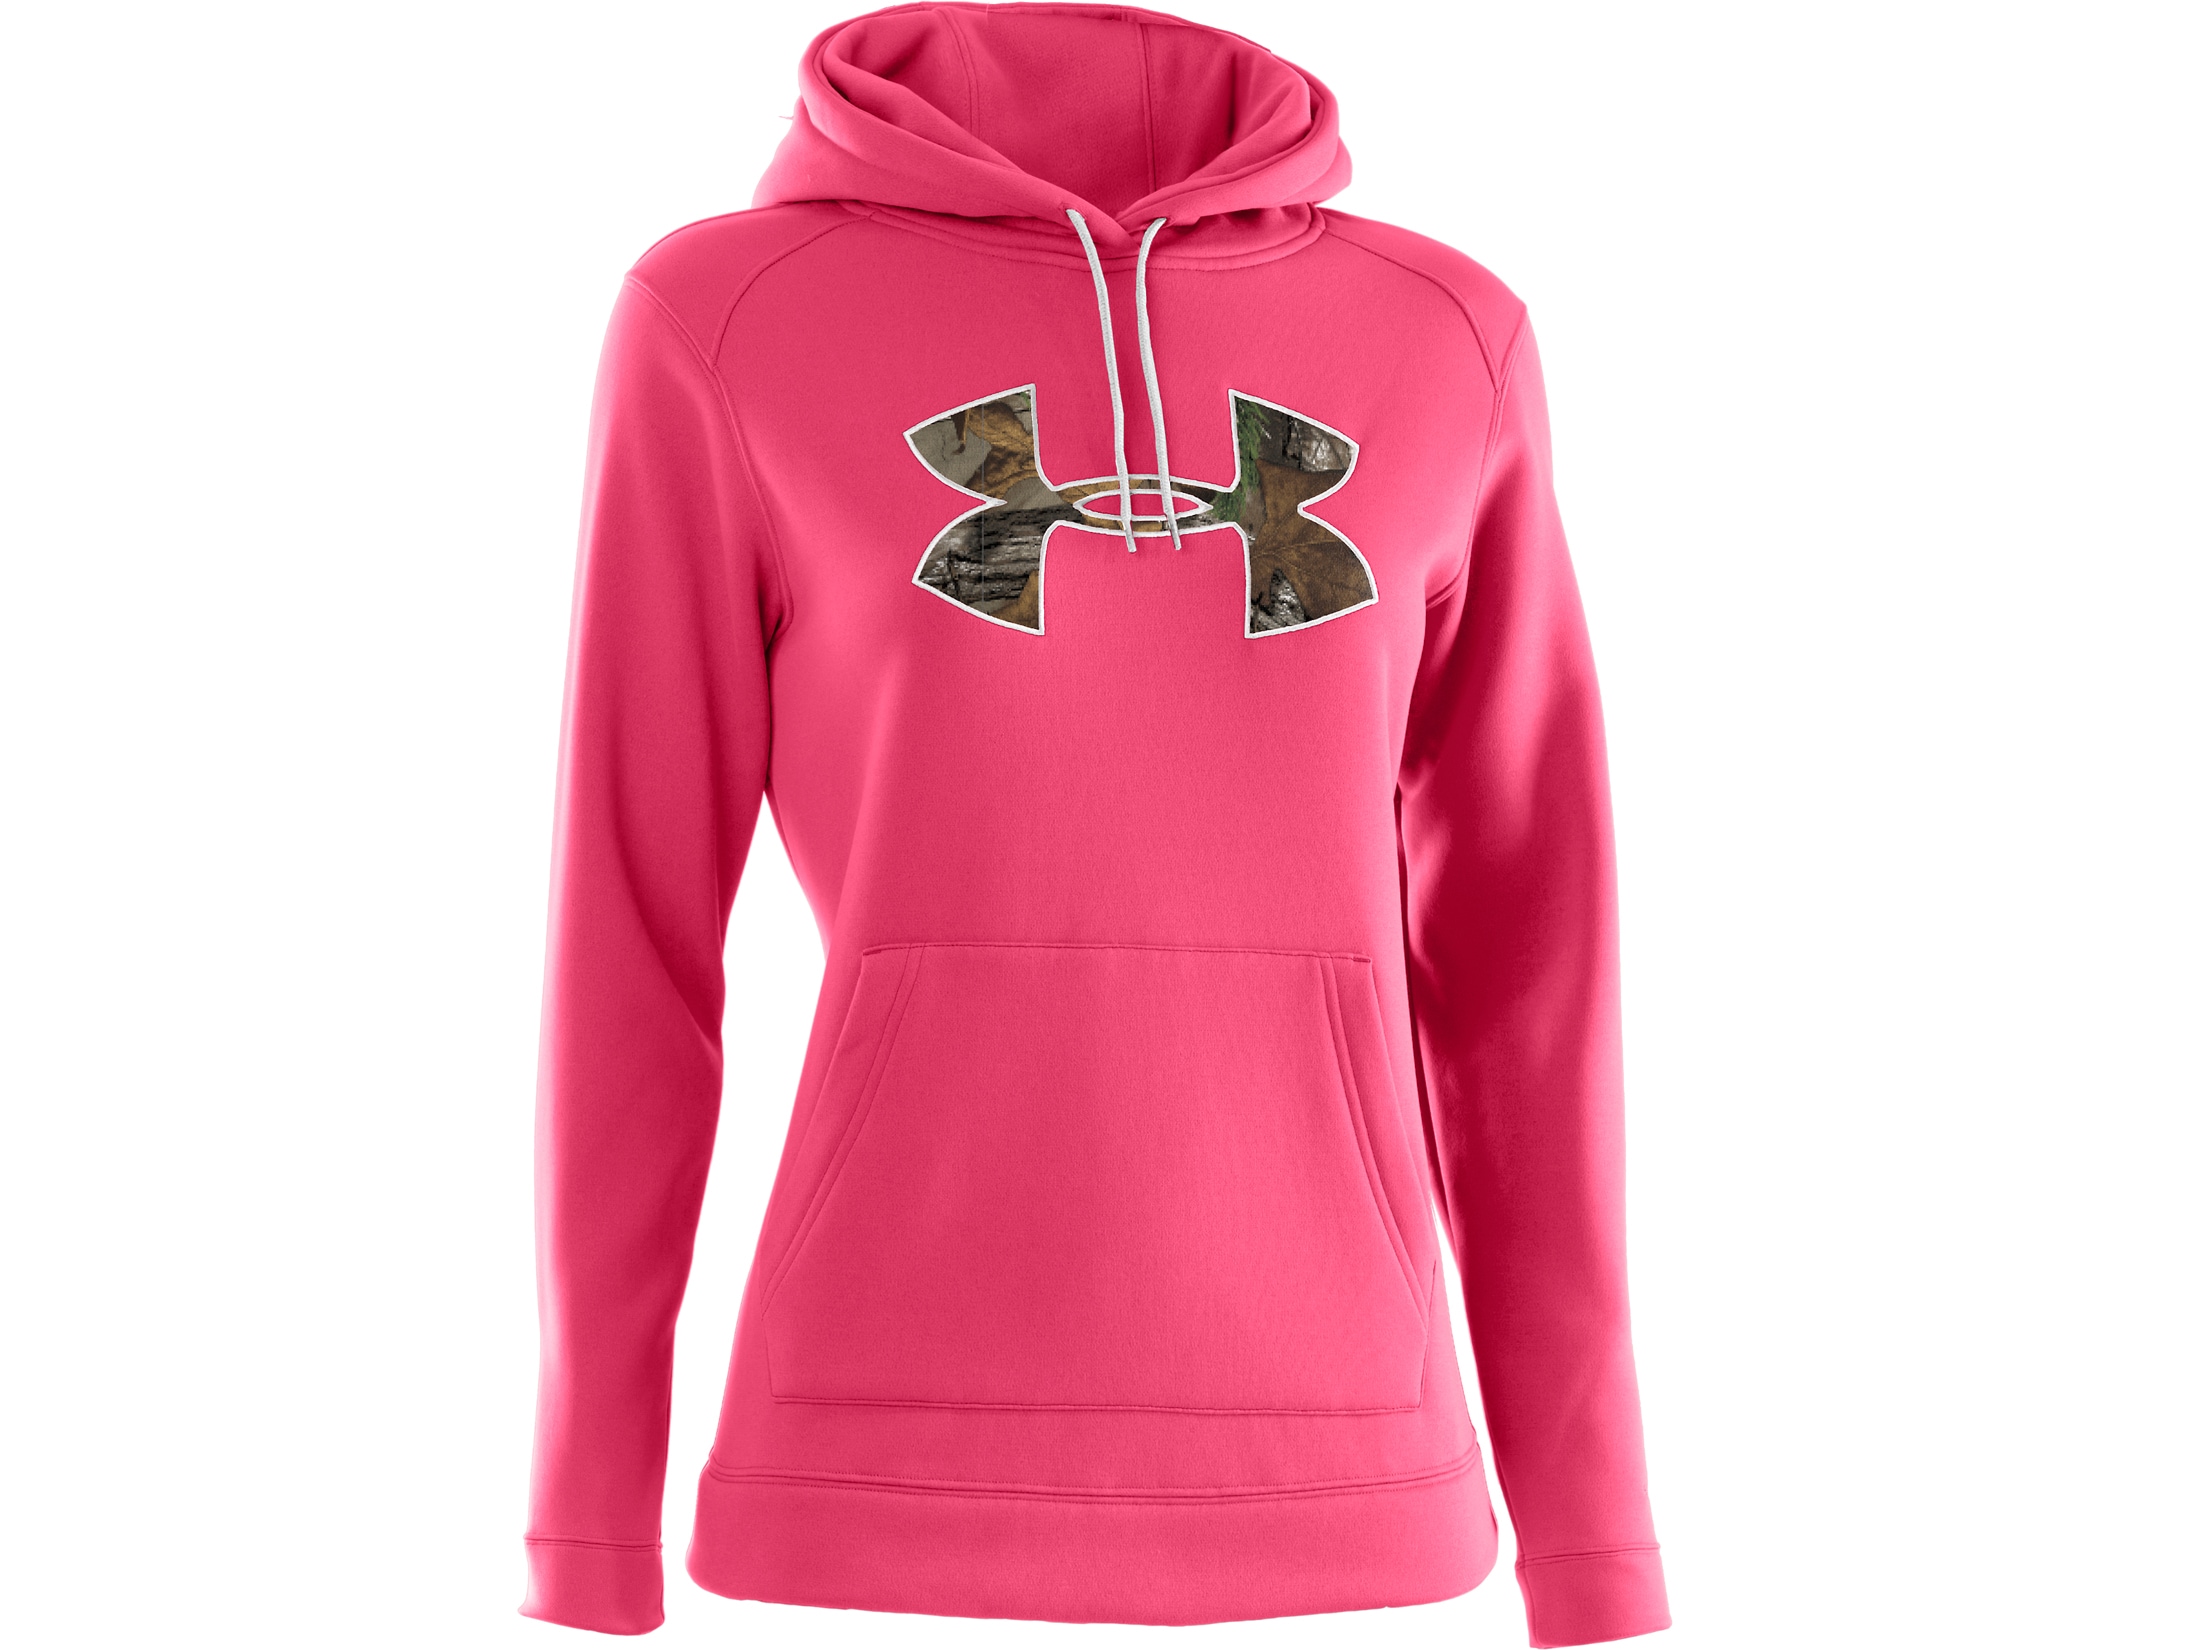 Under Armour Women's Tackle Twill Hooded Sweatshirt Polyester